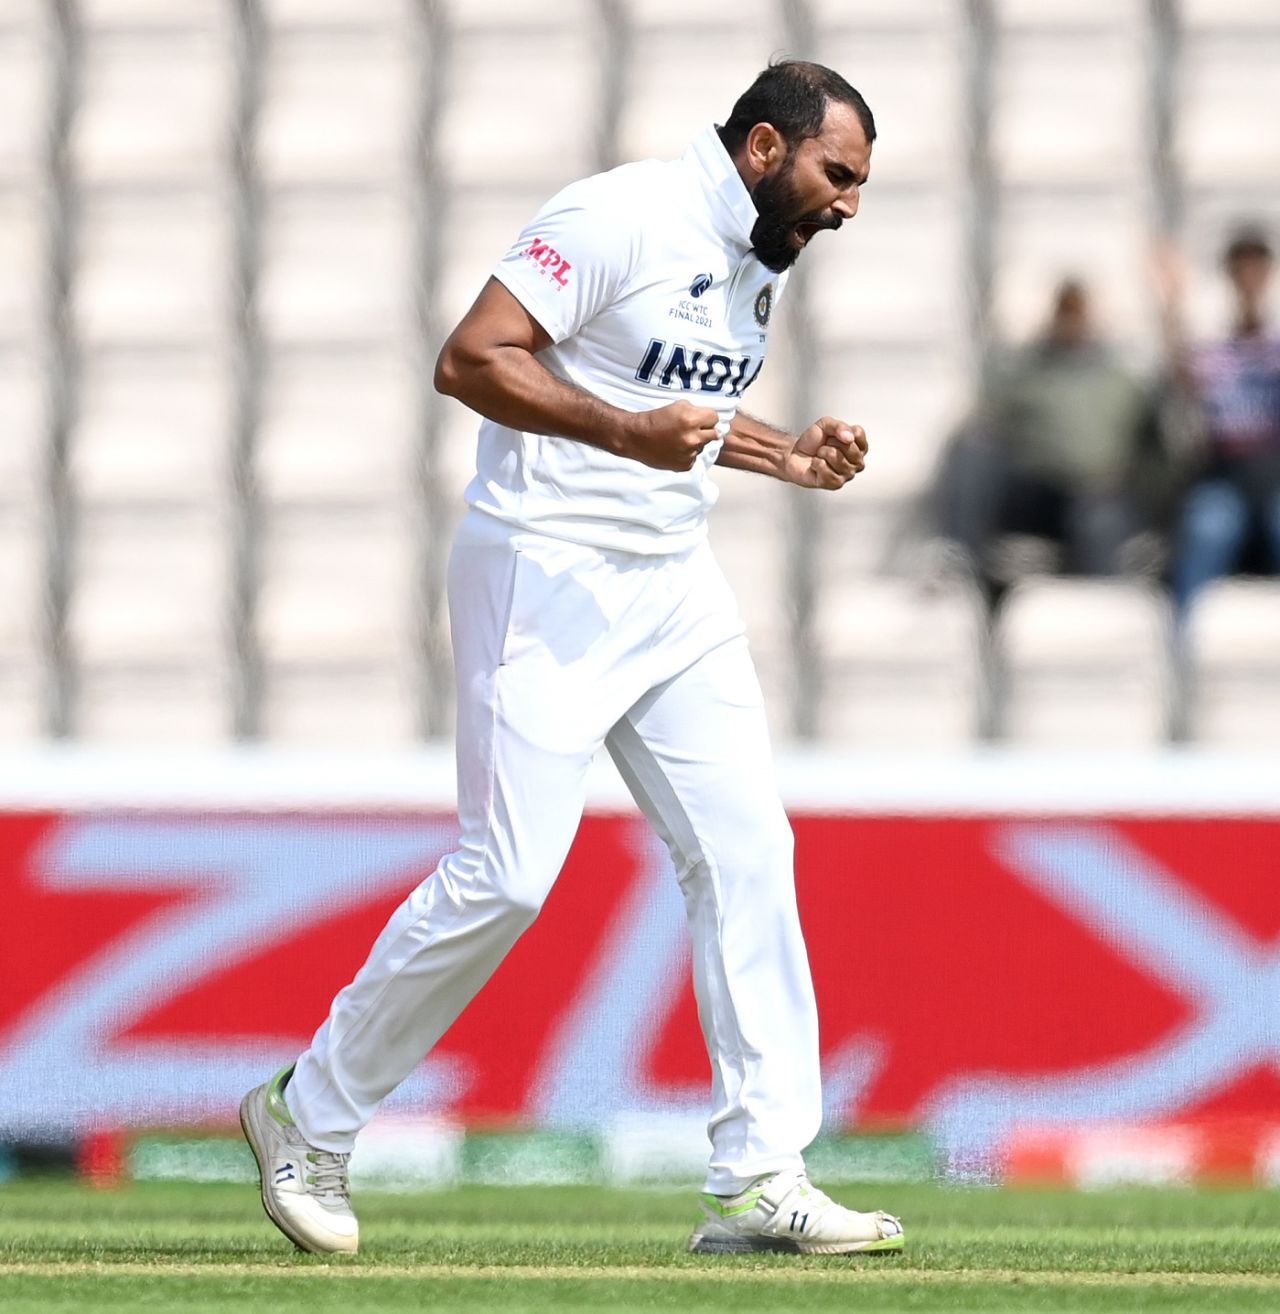 Mohammed Shami is jubilant after getting rid of Kyle Jamieson, India vs New Zealand, WTC final, Southampton, 5th day, June 22, 2021